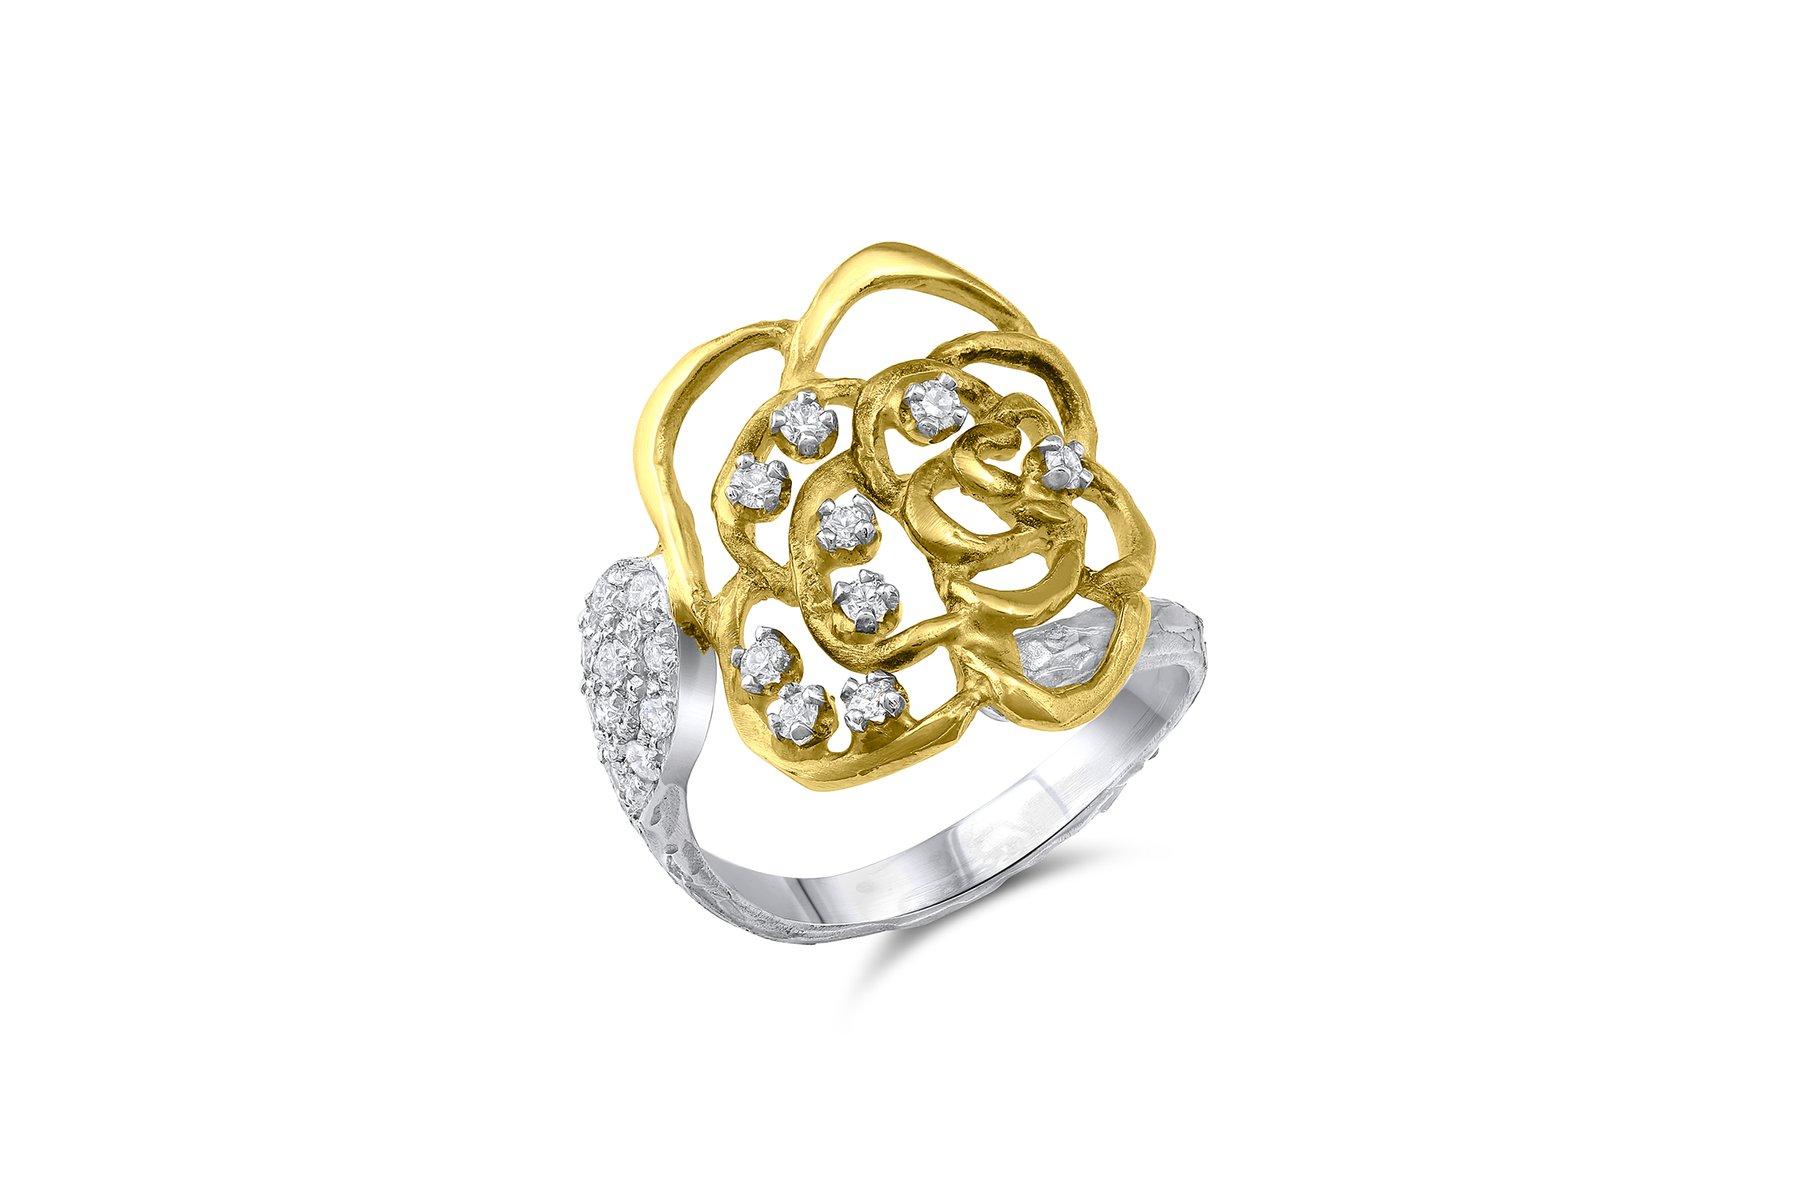 18k Yellow and White Gold Salavetti White Diamond Rose Ring, 3.80 DWT with Melee diamonds. 
Ring Size 7.75.